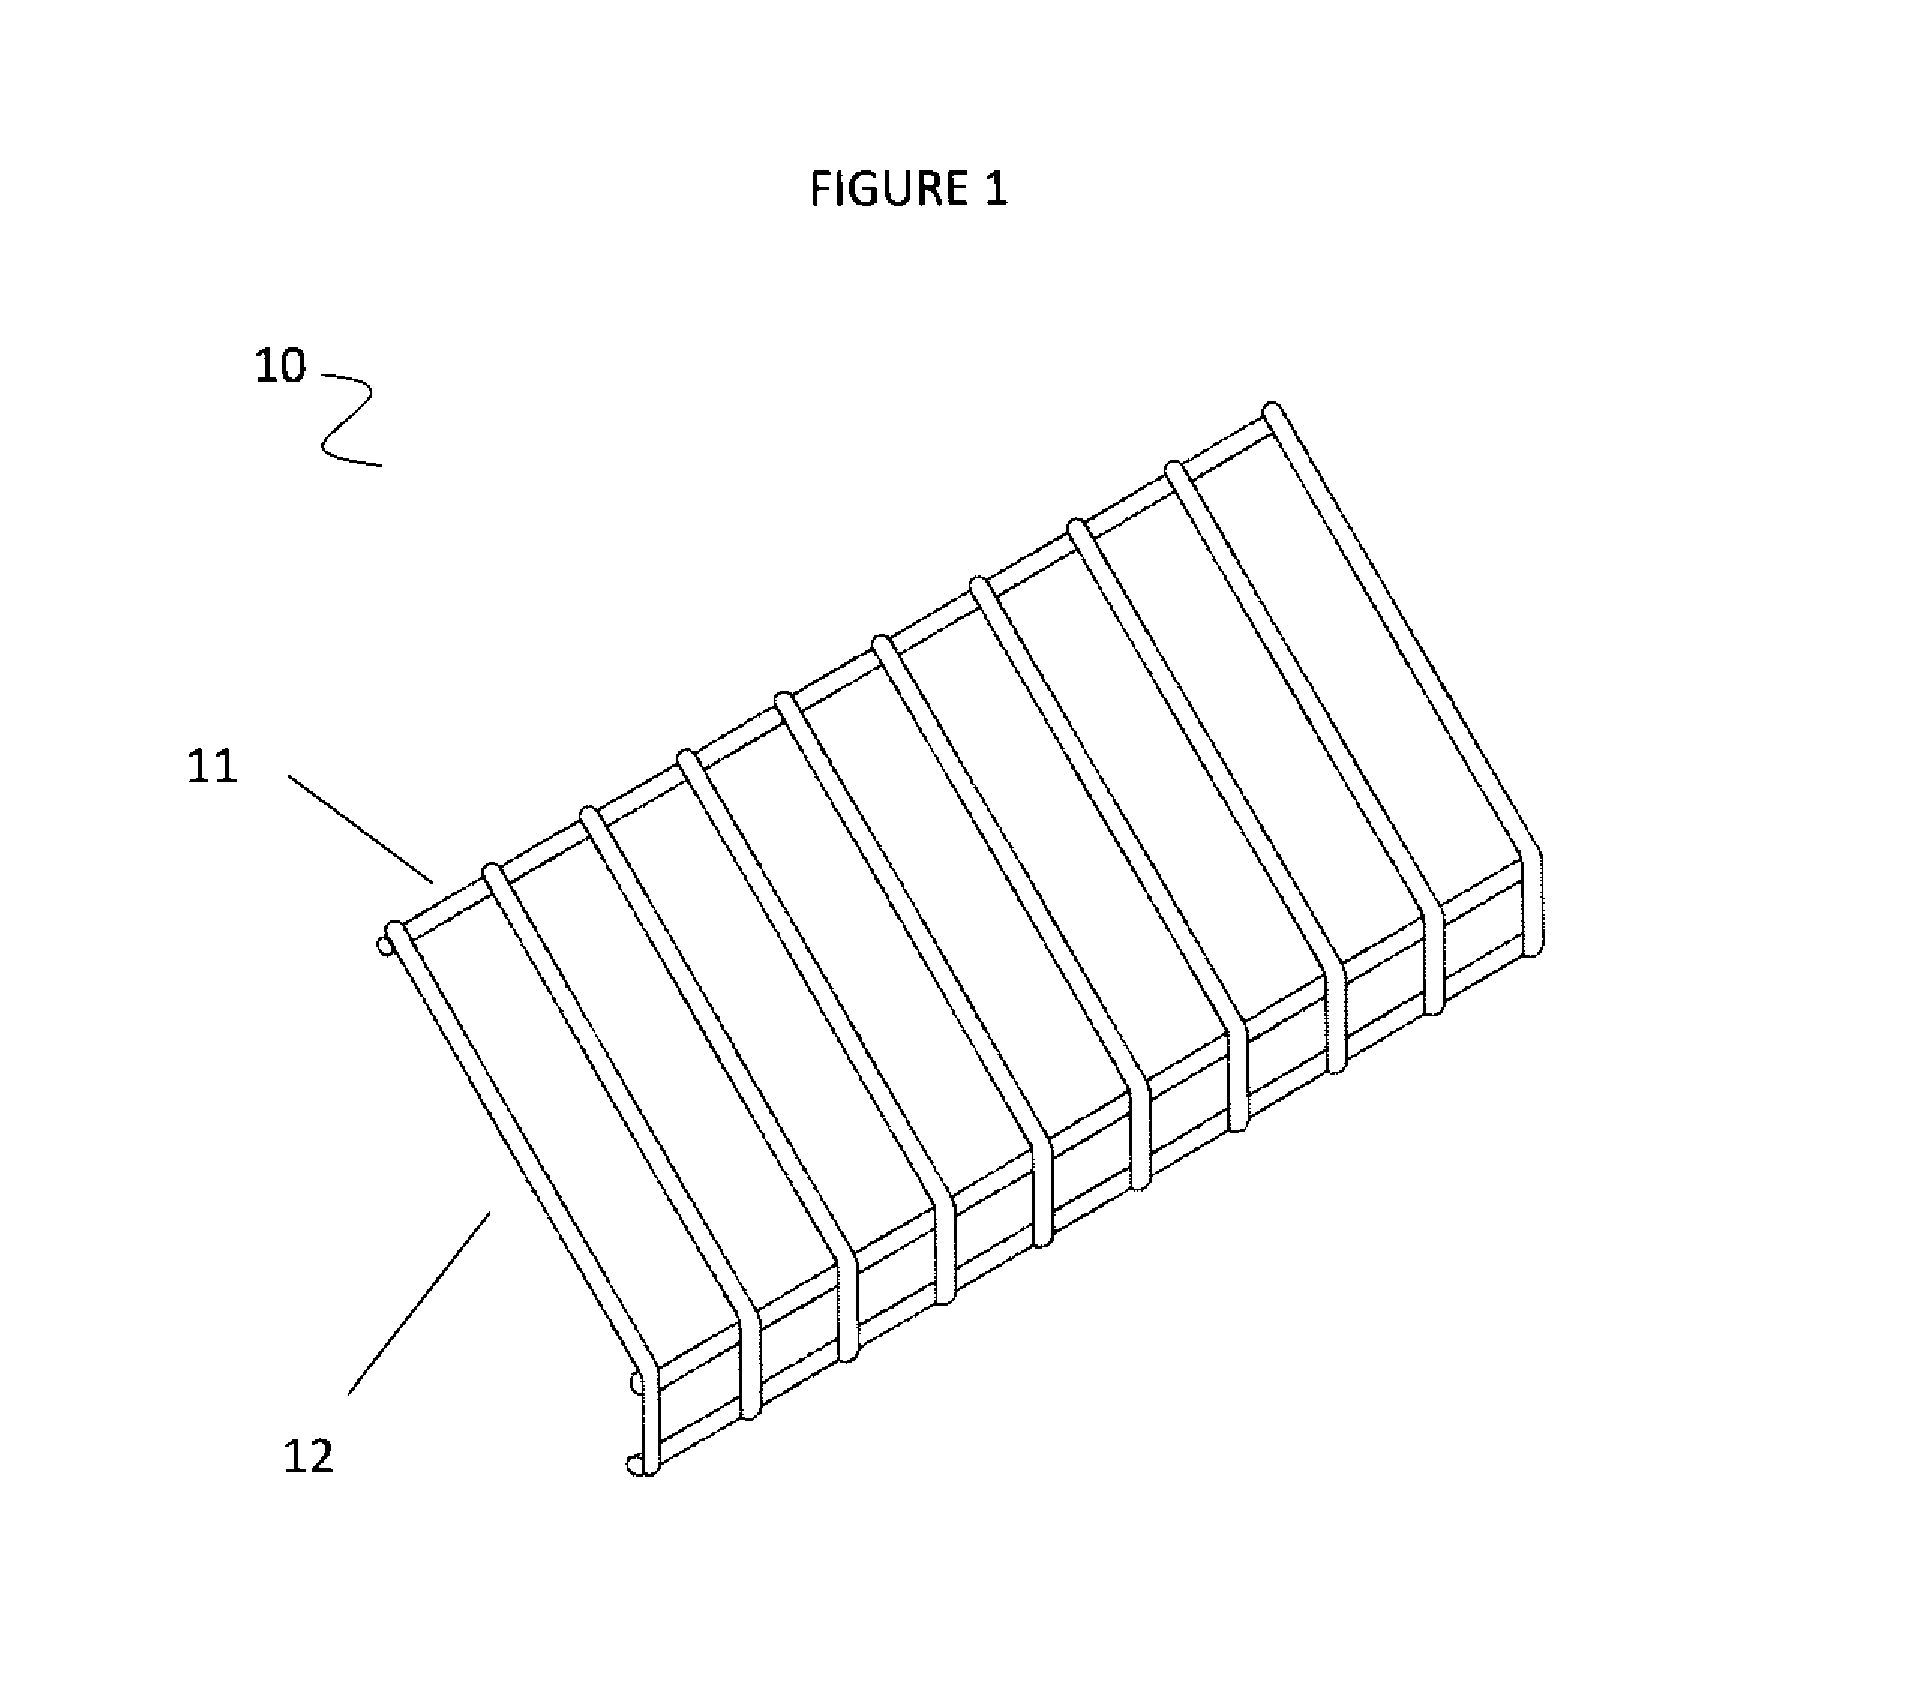 Shelving and protective covering system